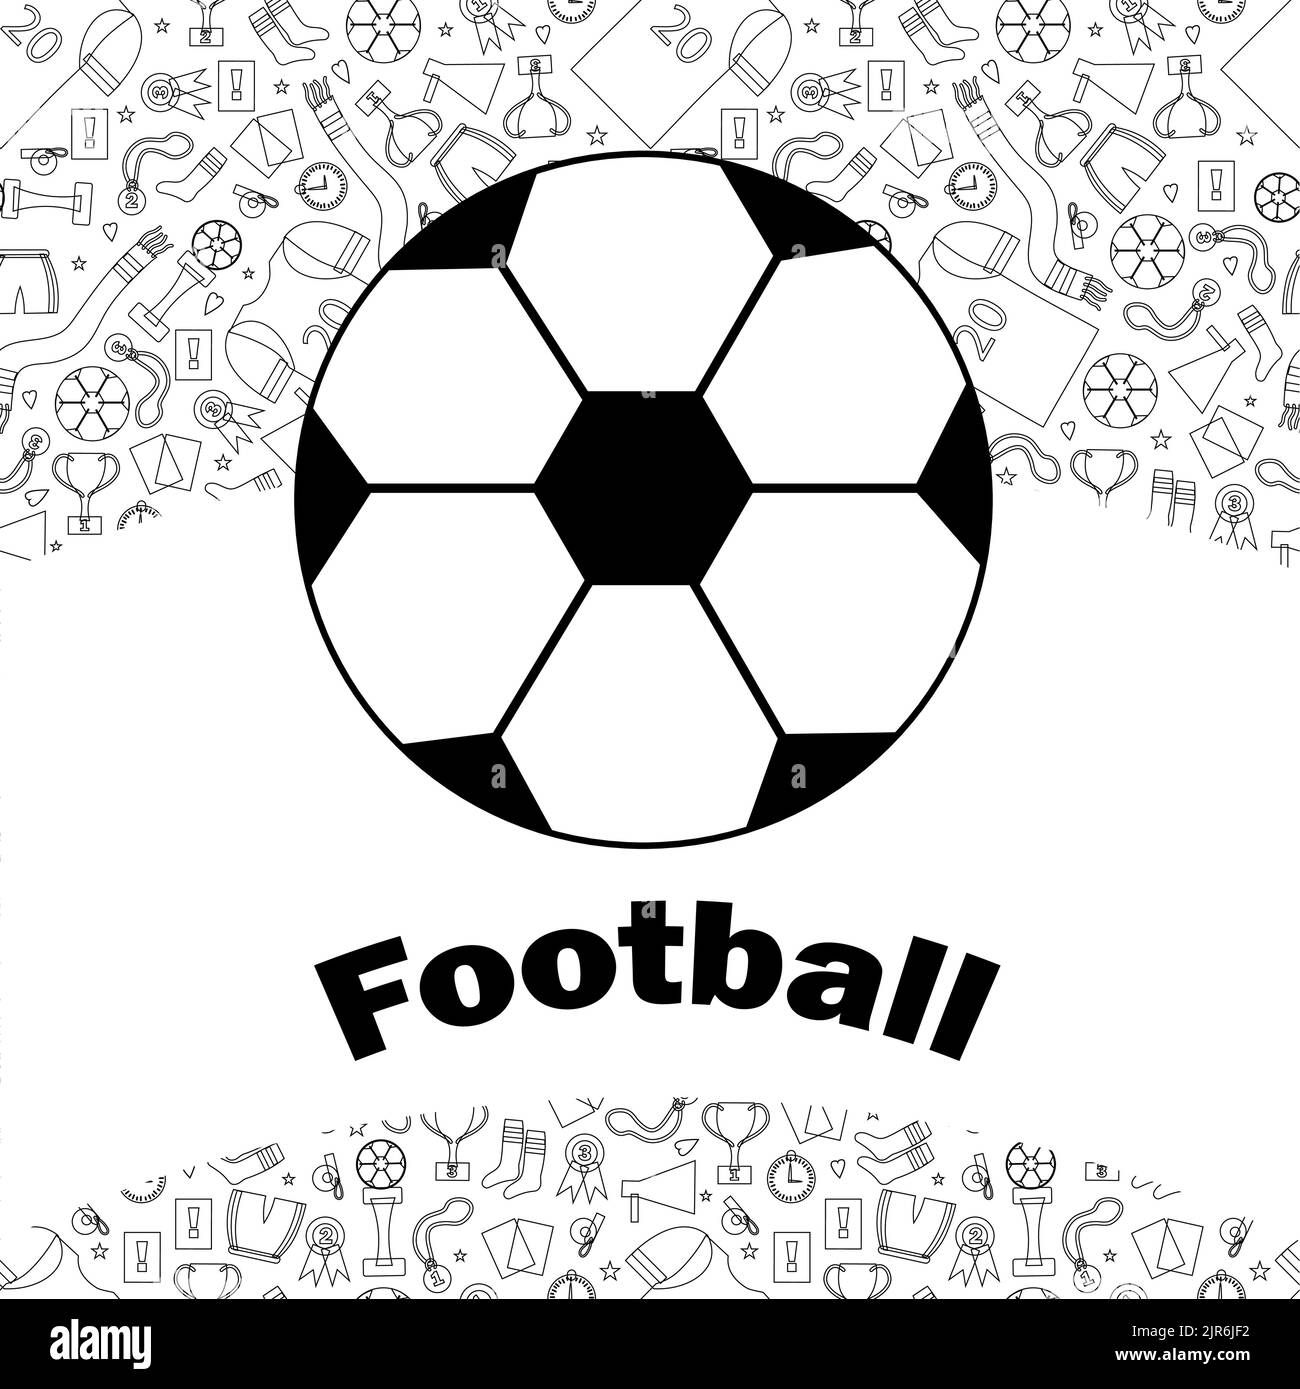 Soccer ball sketch black and white stock photos images